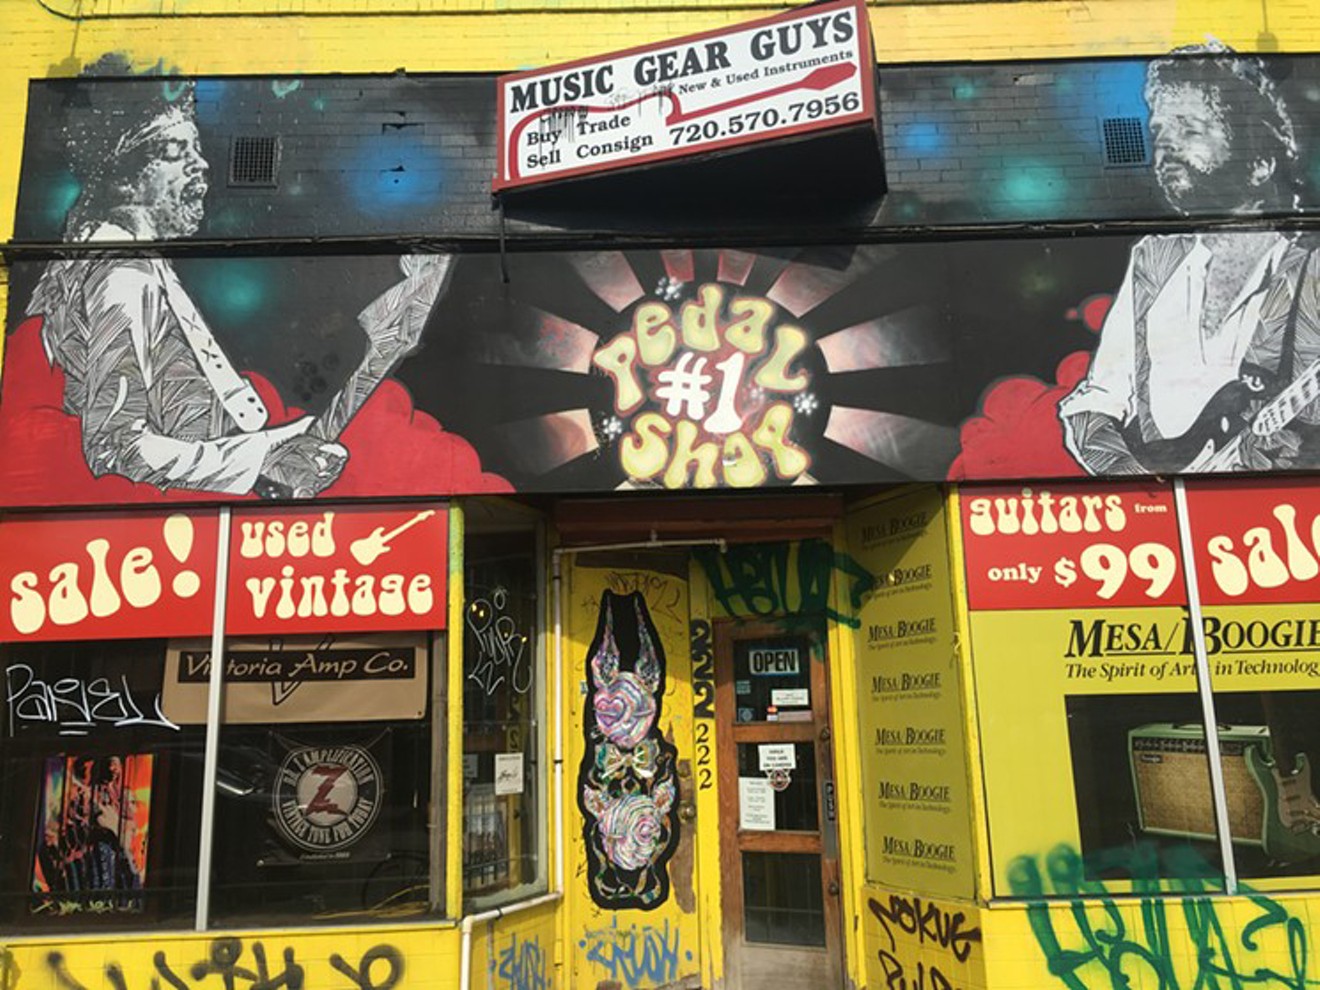 Music Gear Guys will close after being priced out by skyrocketing rent.